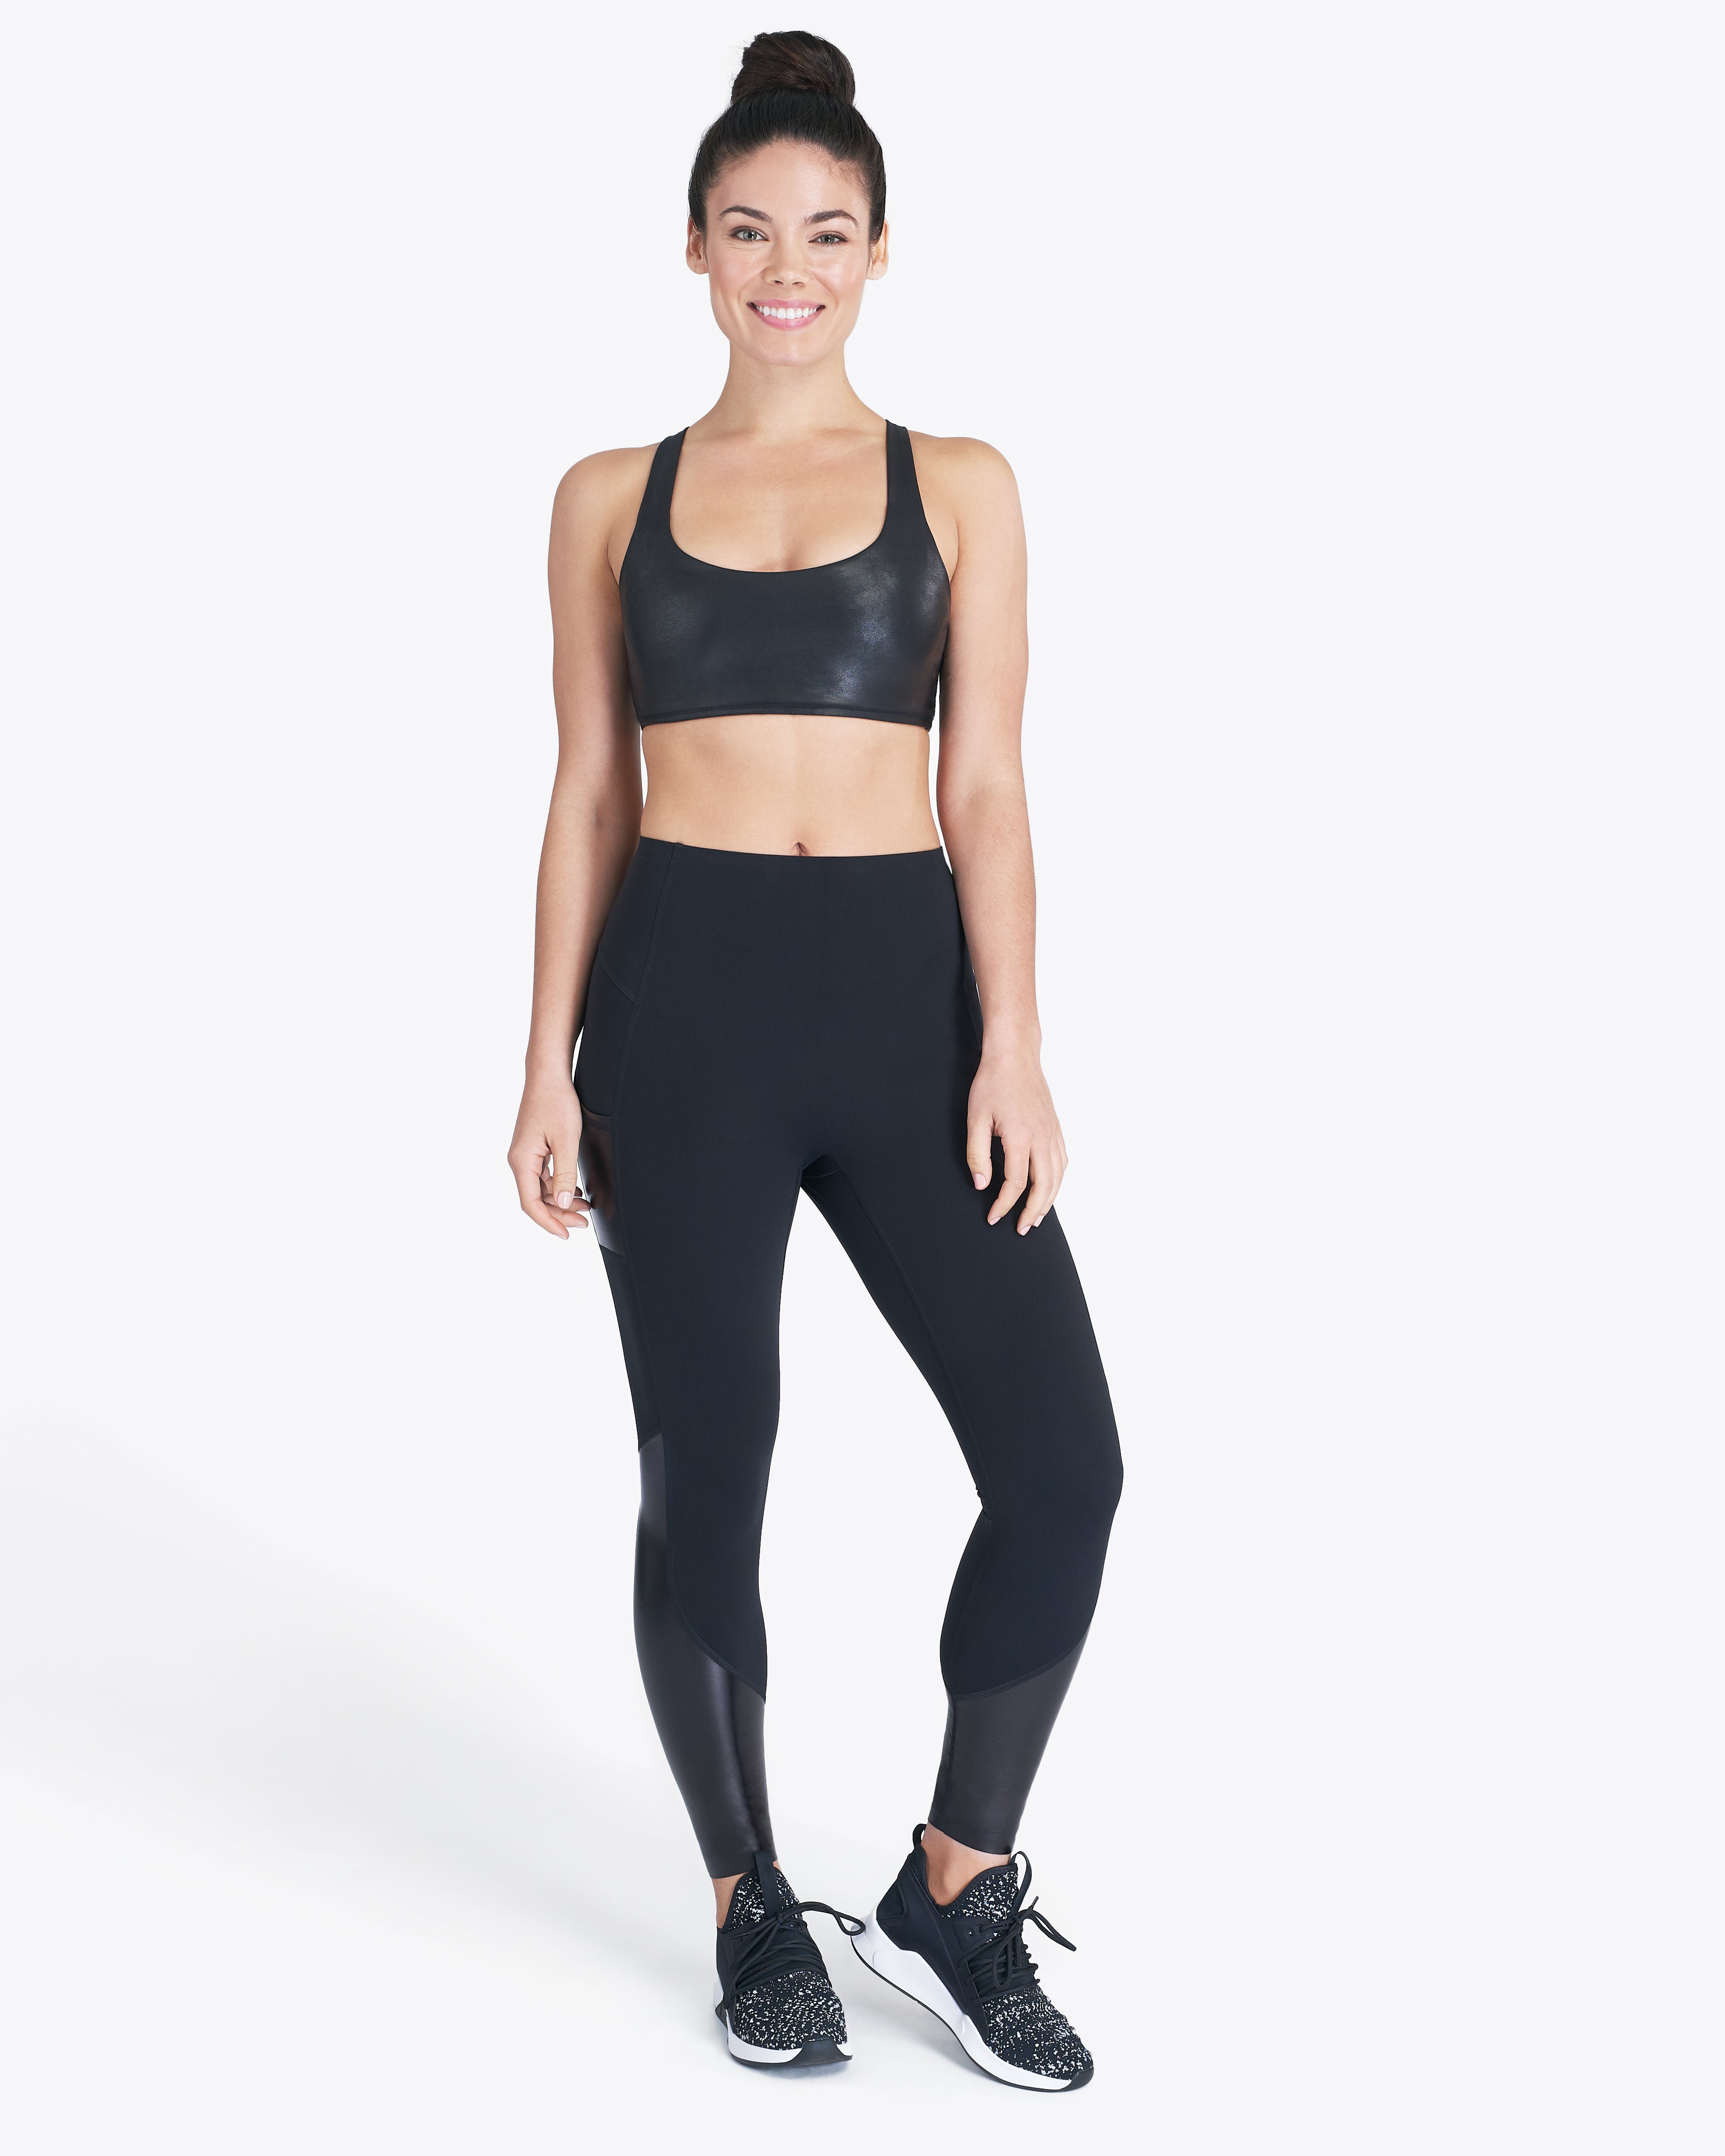 SPANX - Keep *palm* & carry on in Spanx Activewear